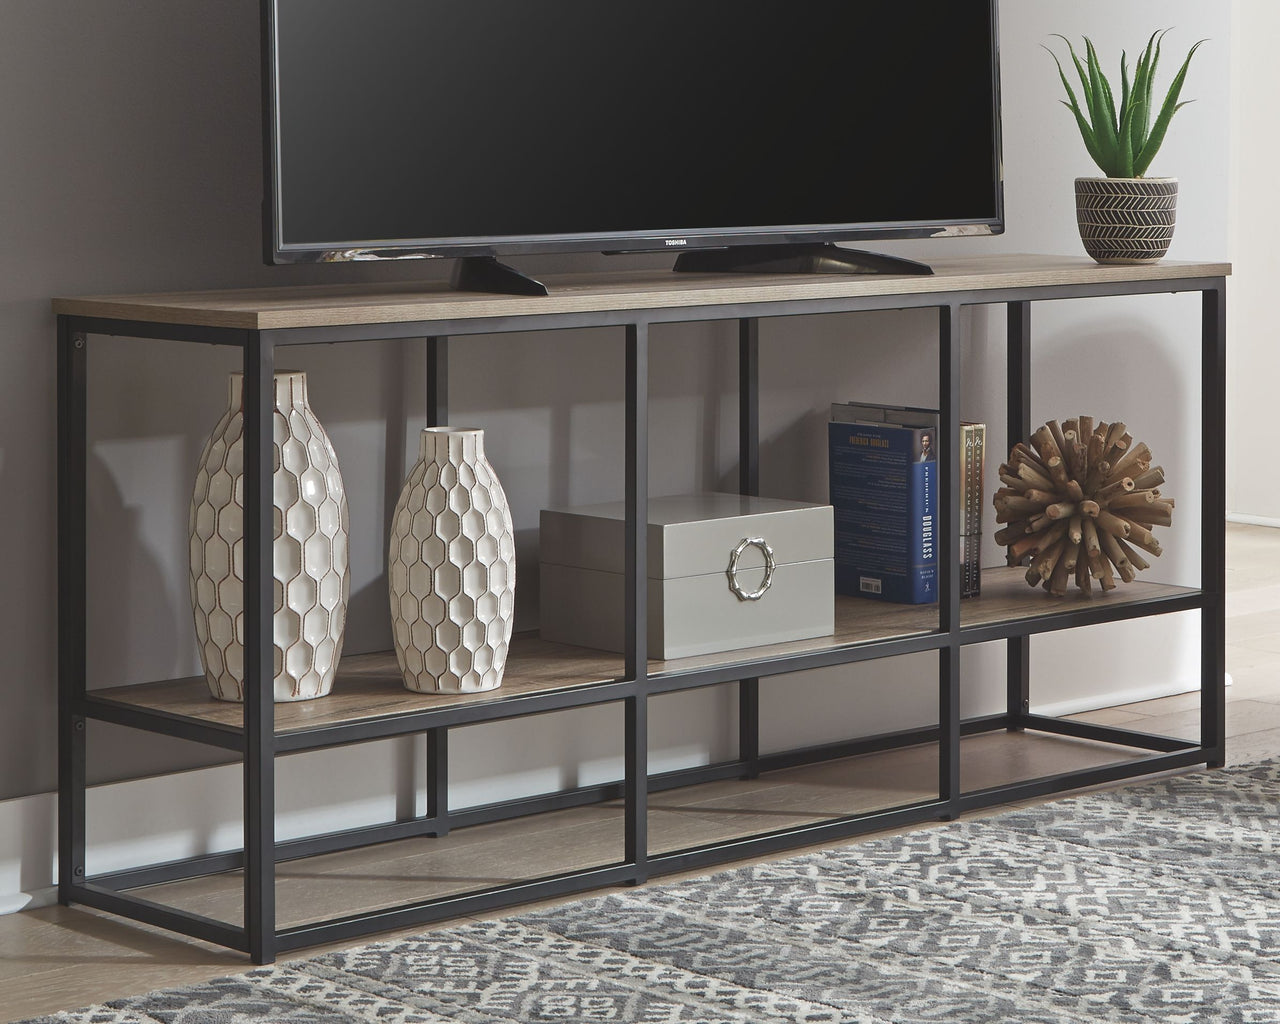 Wadeworth - Brown / Black - Extra Large TV Stand - Tony's Home Furnishings